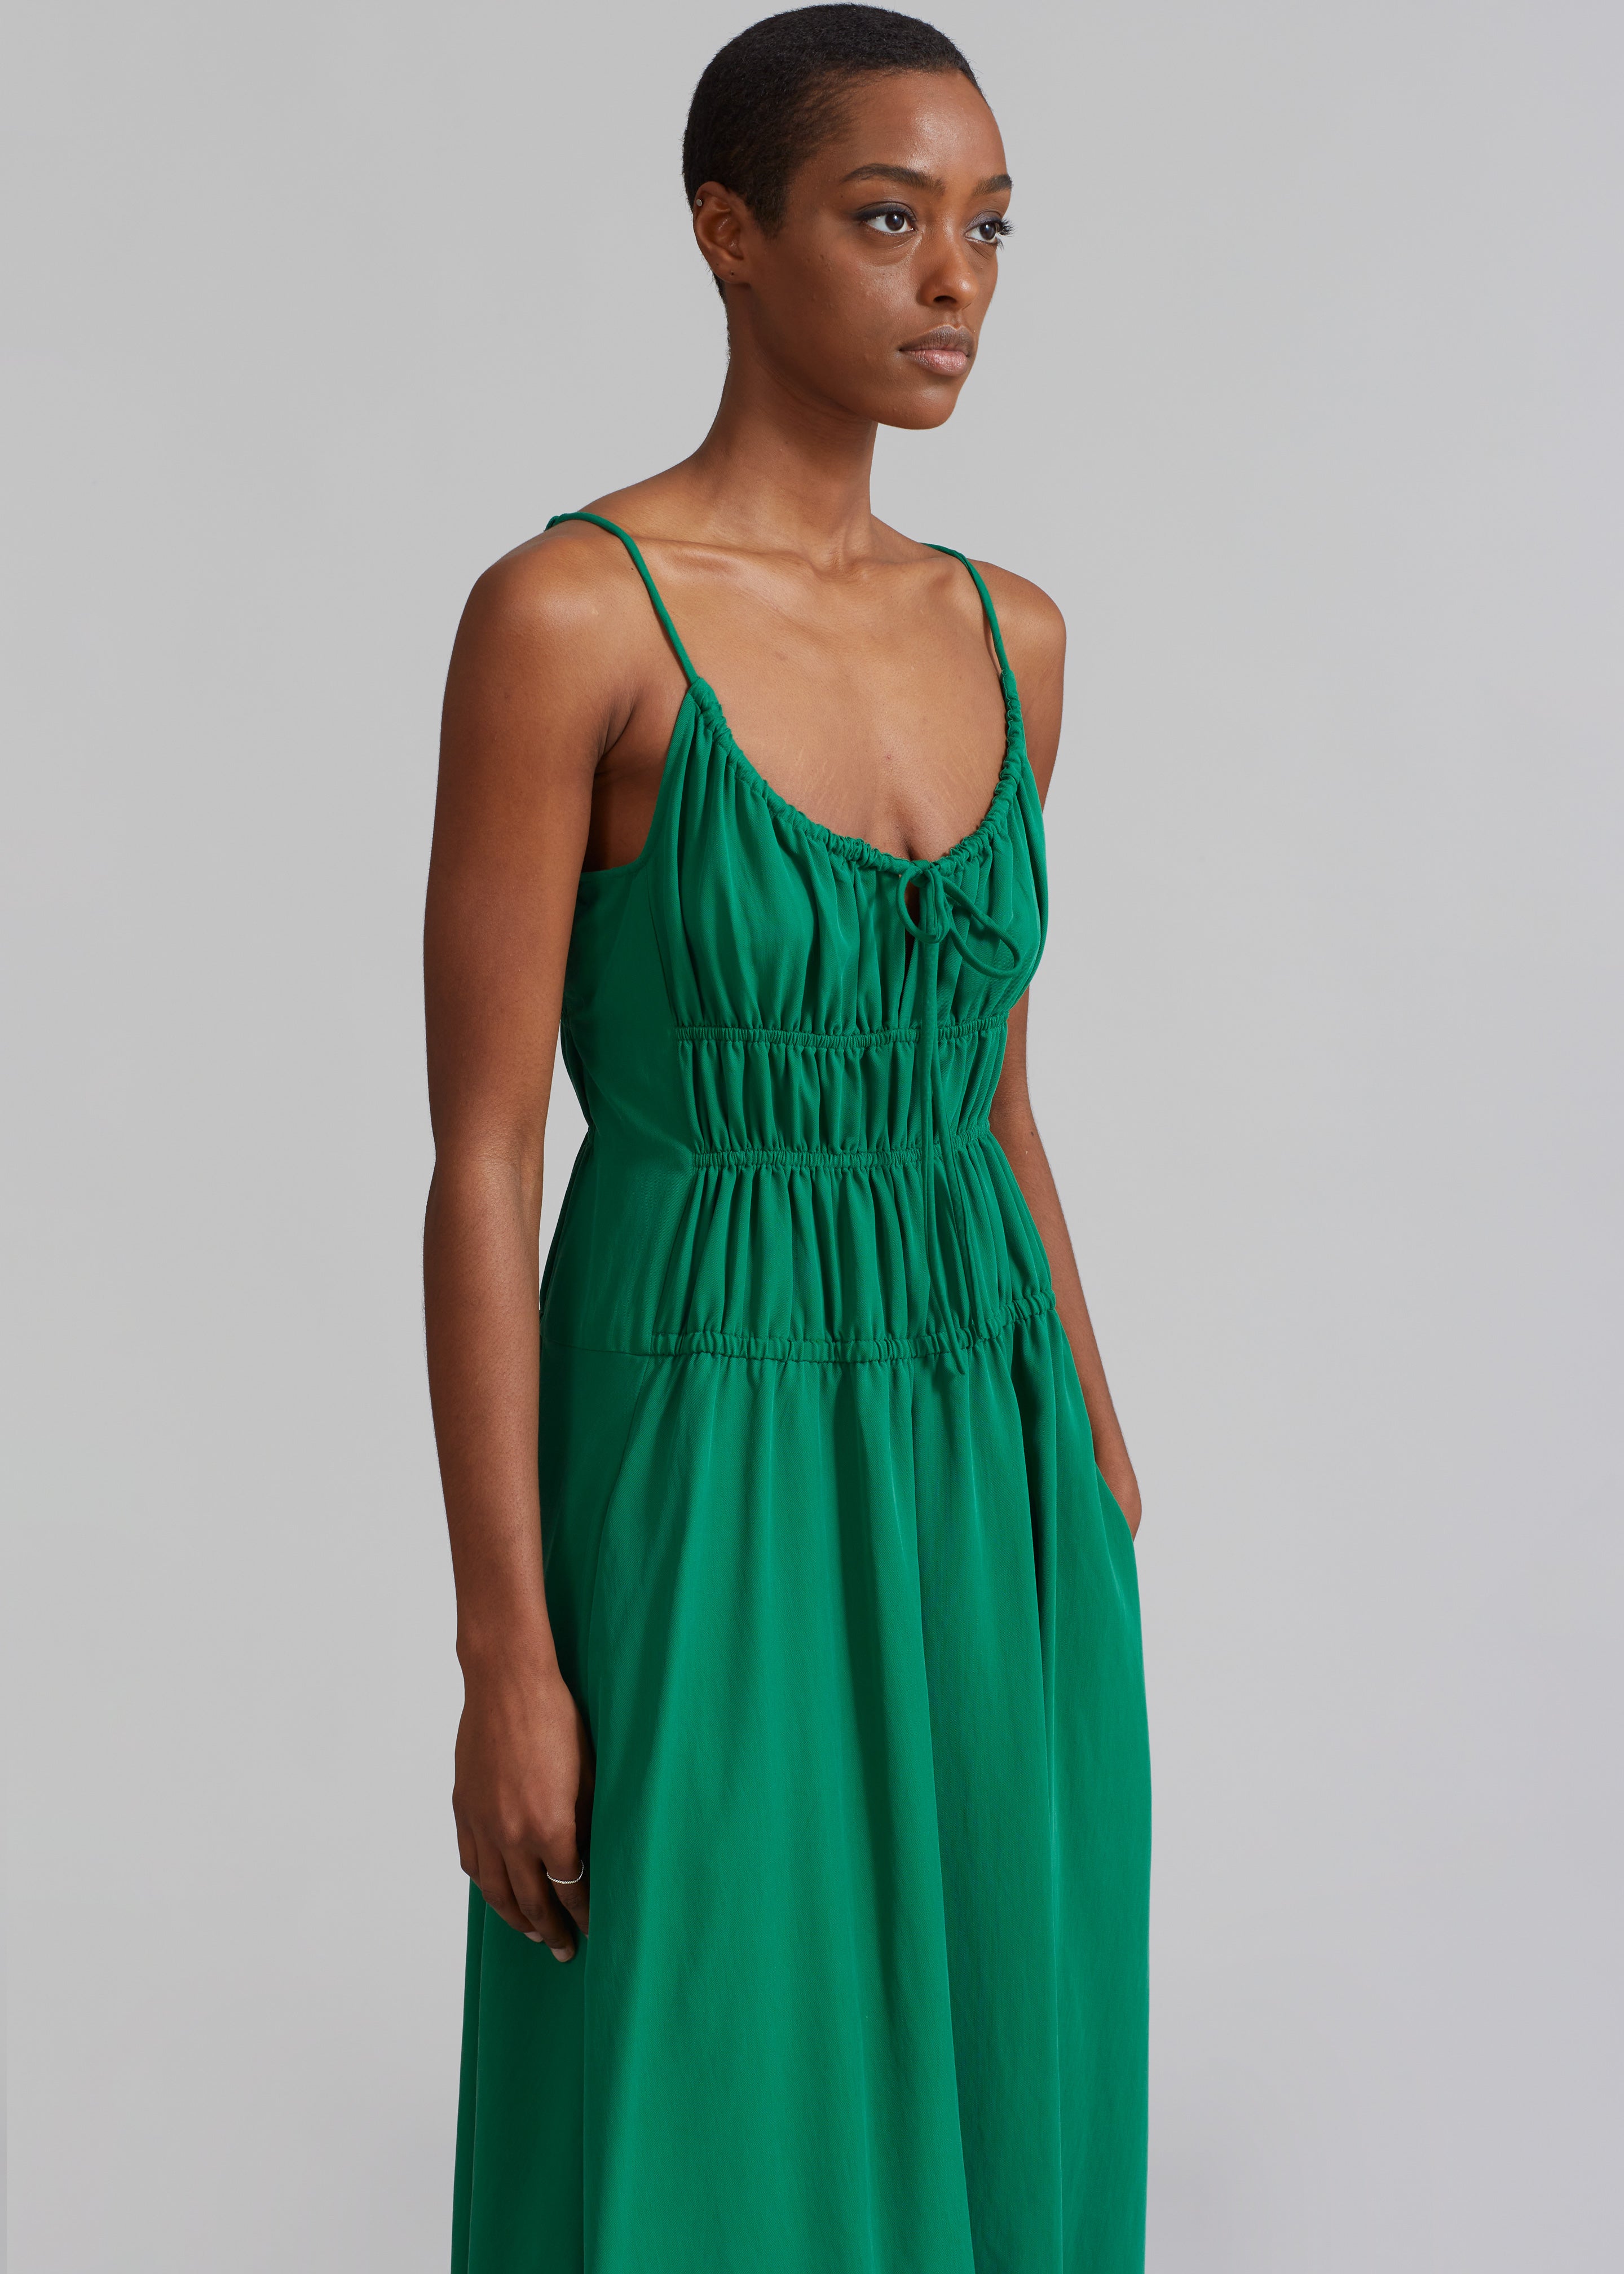 Proenza Schouler White Label Drapey Suiting Ruched Dress - Green - 6